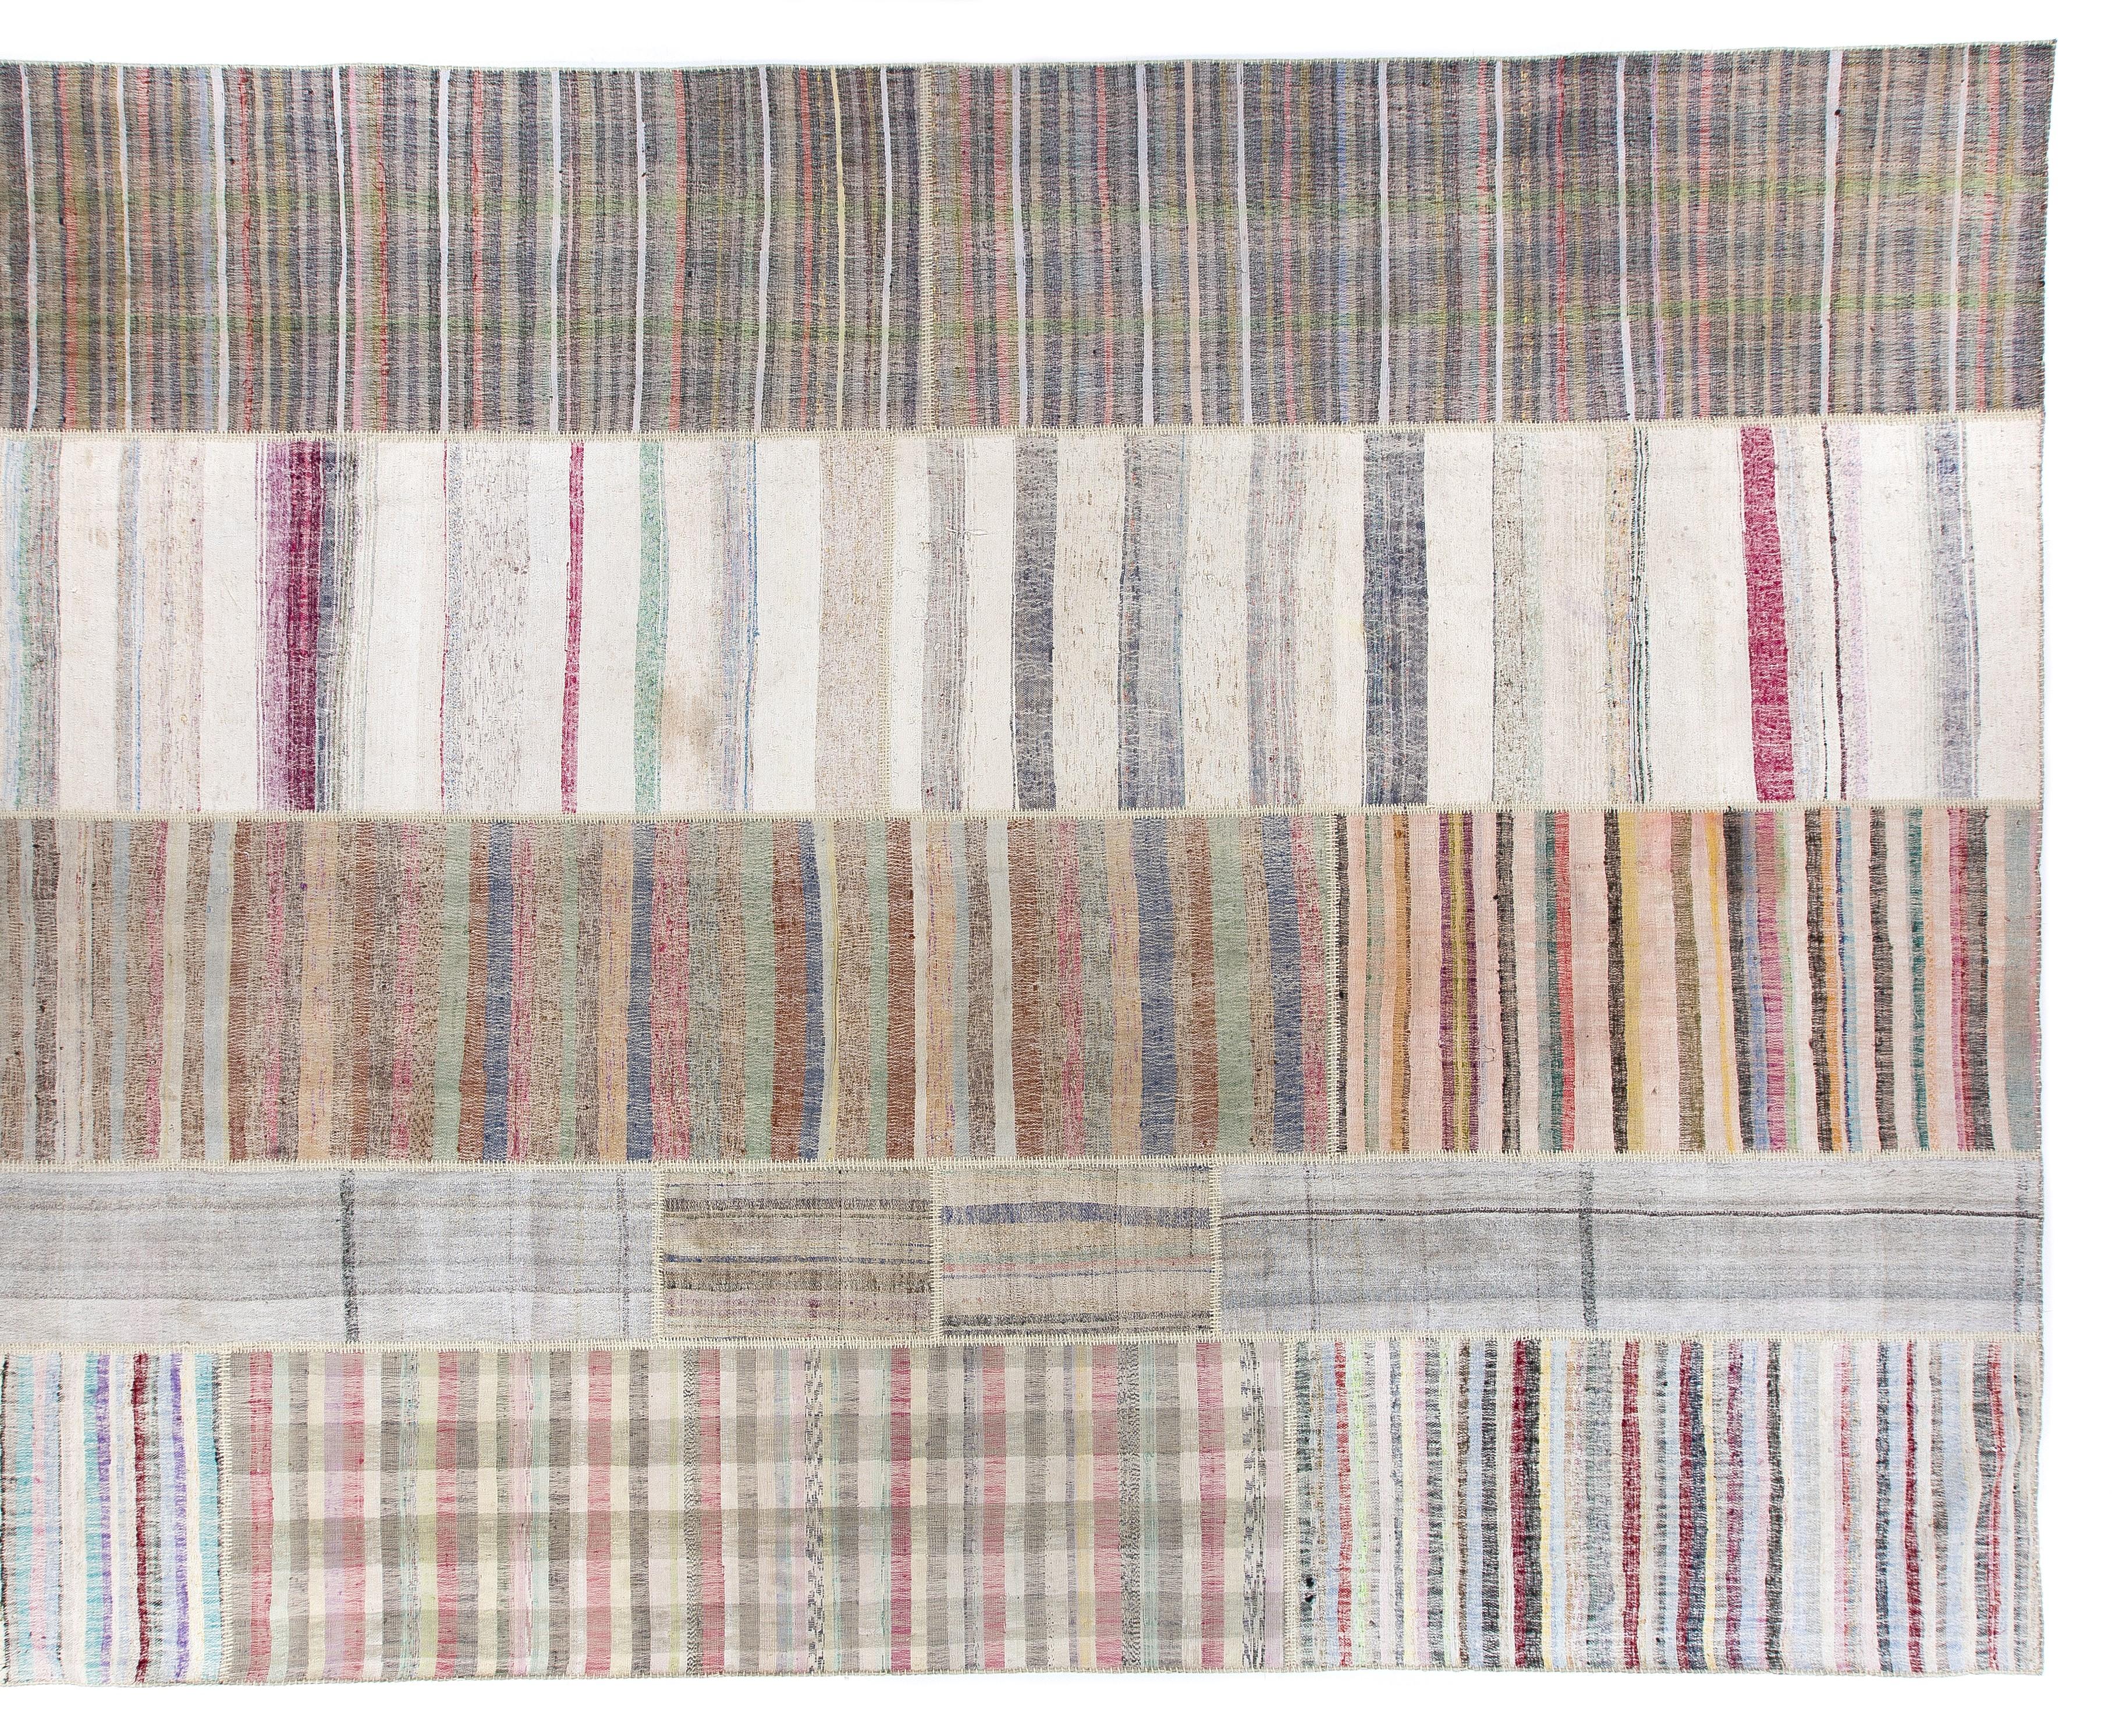 12.4x16.4 Ft Oversize Striped Cotton Colorful Rag Rug, Adjustable, Vintage Kilim In Good Condition For Sale In Philadelphia, PA